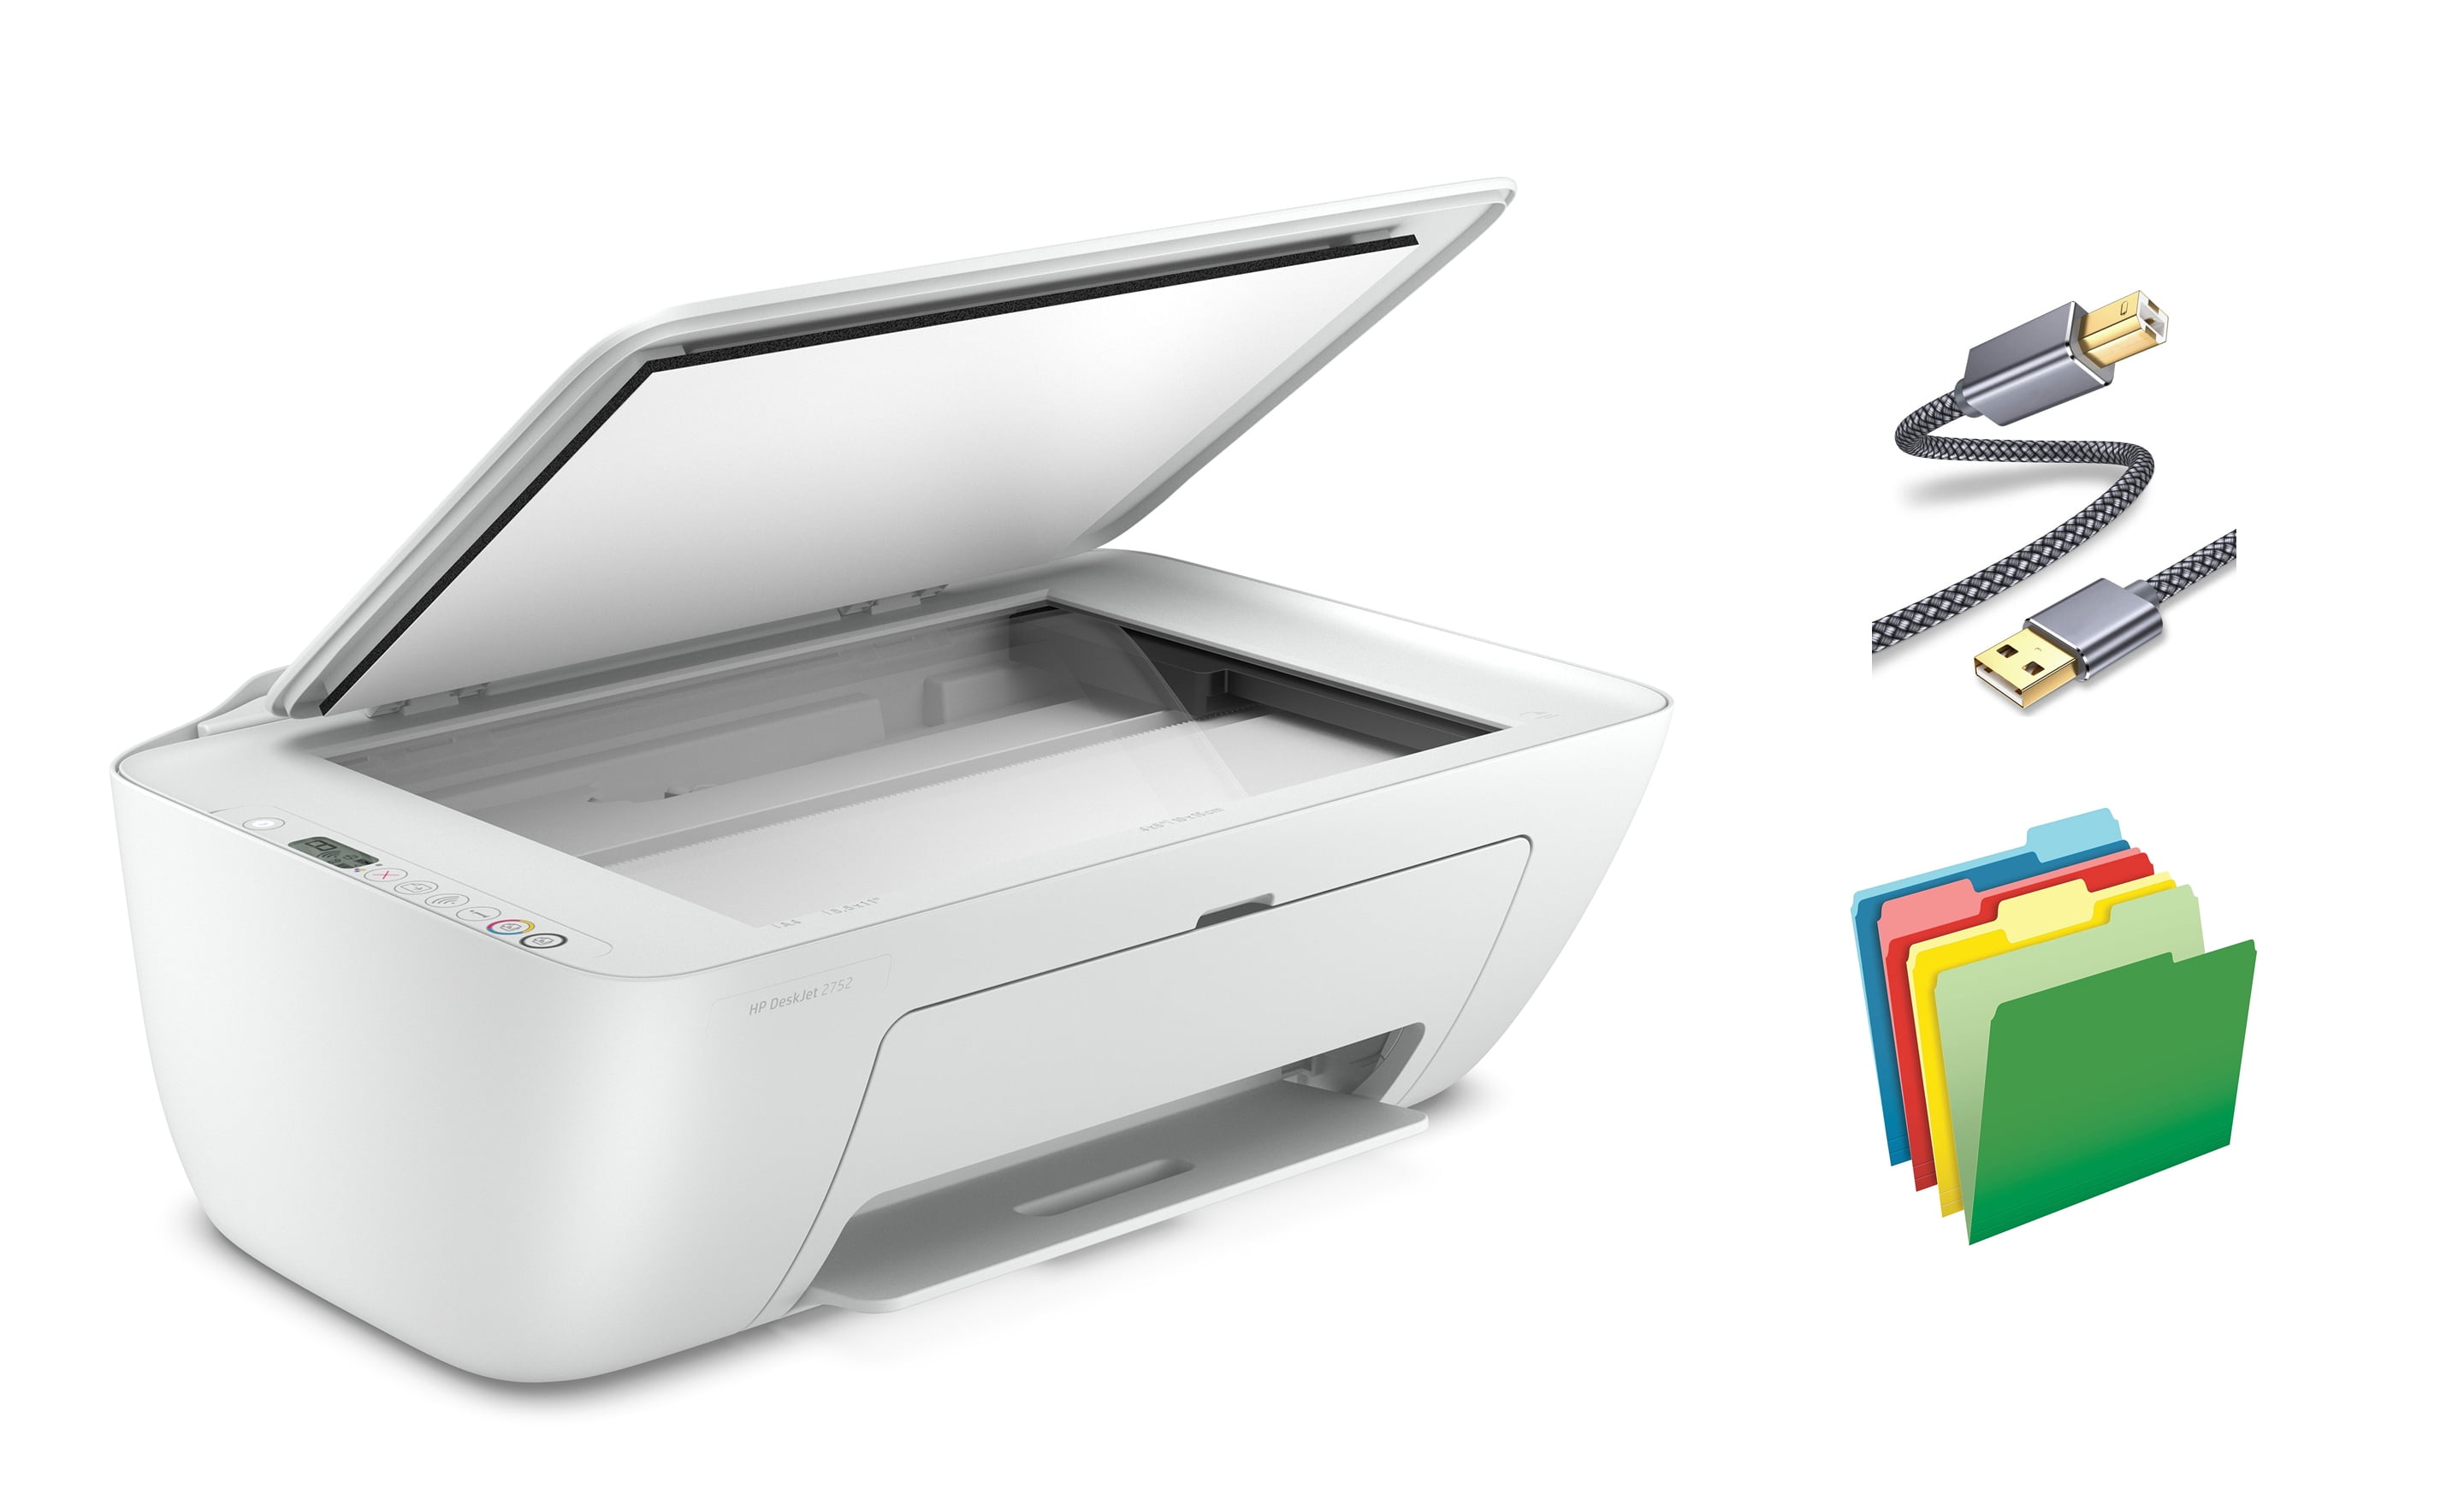 H-P DeskJet 27 series, All-in-One Wireless Color Inkjet Printer, Scan and Copy with Mobile Printing, 1200 x 1200 dpi, Icon LCD Display, MTC Printer Cable File Folders - Walmart.com